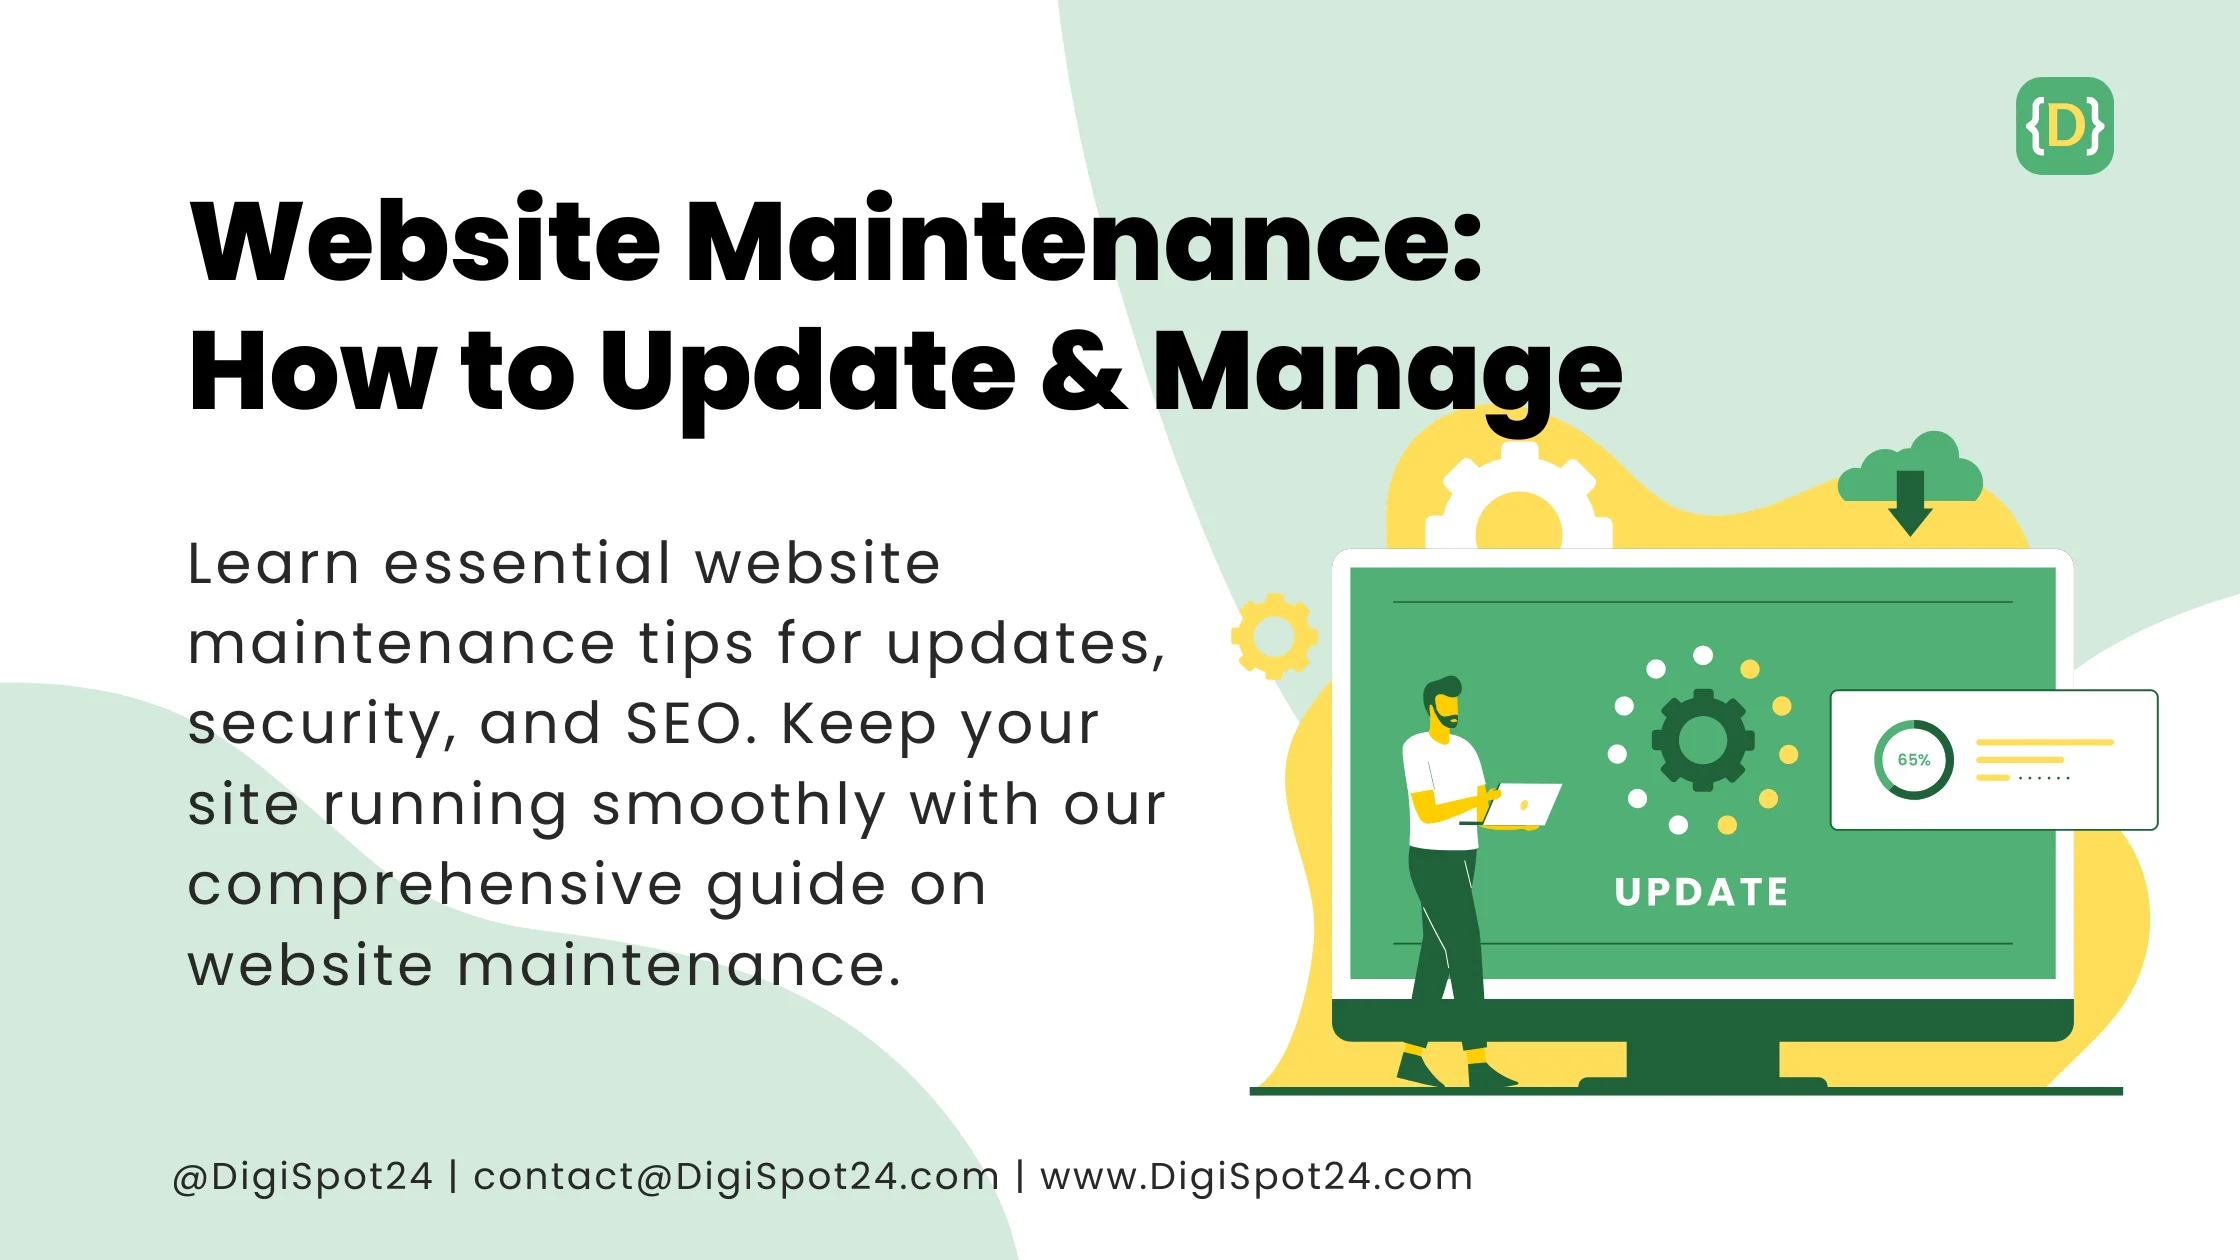 Website Maintenance: How to Update & Manage